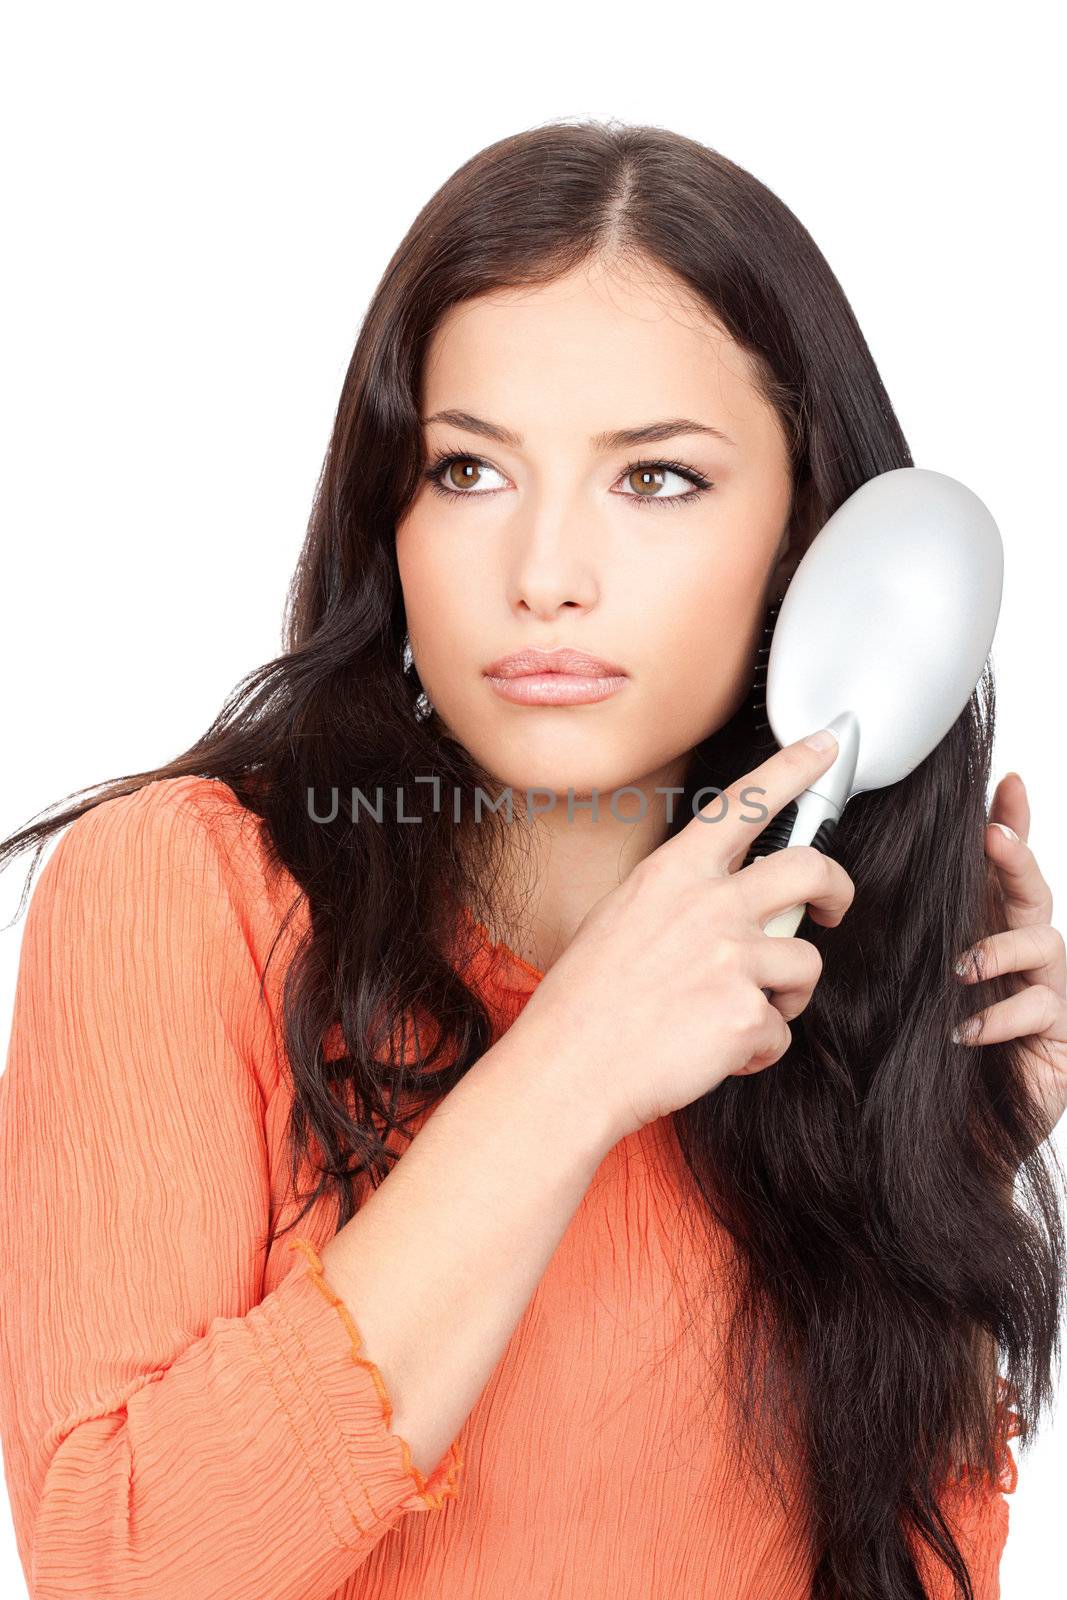 Portrait of a pretty woman combing her long black hair, isolated on white background